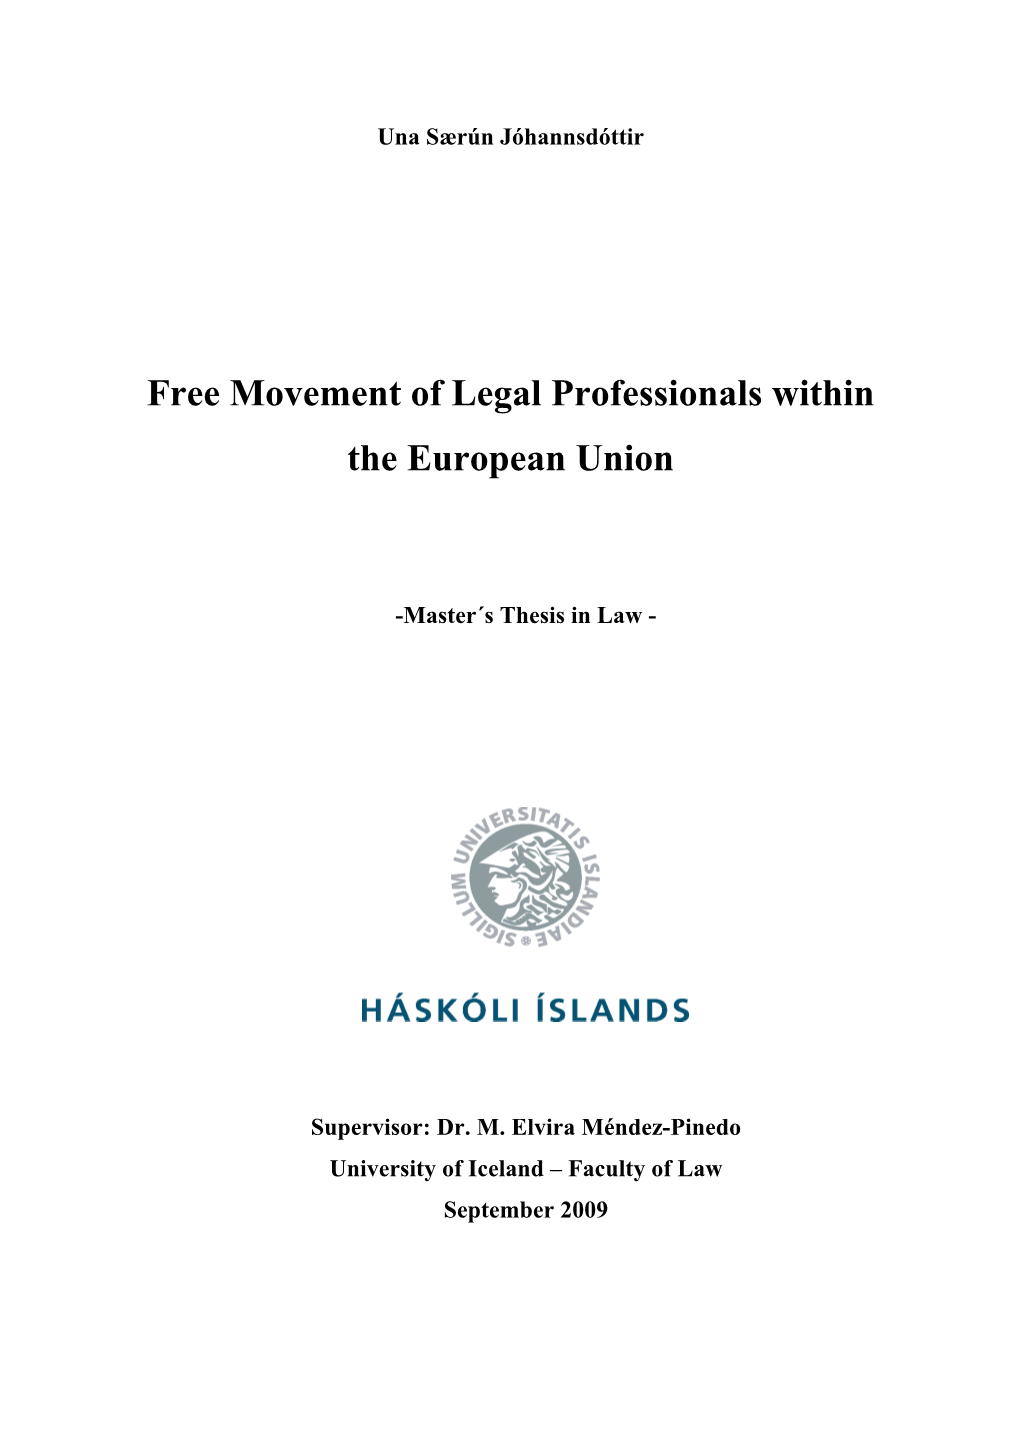 Free Movement of Legal Professionals Within the European Union